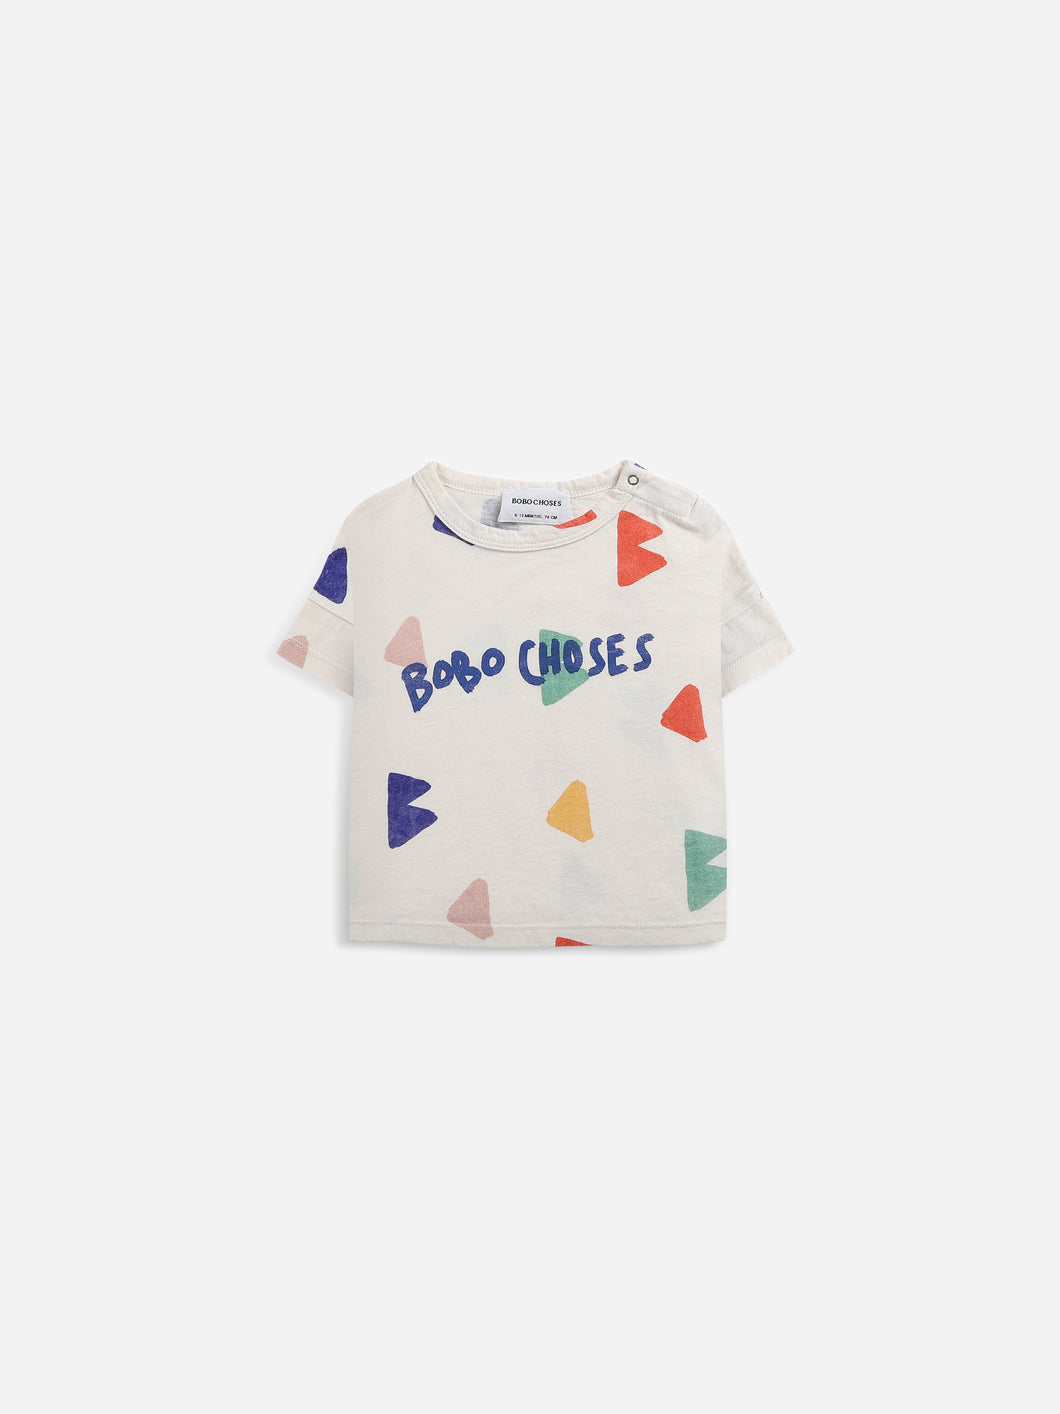 B.C all over short sleeve T-shirt / ボボショーズ Baby